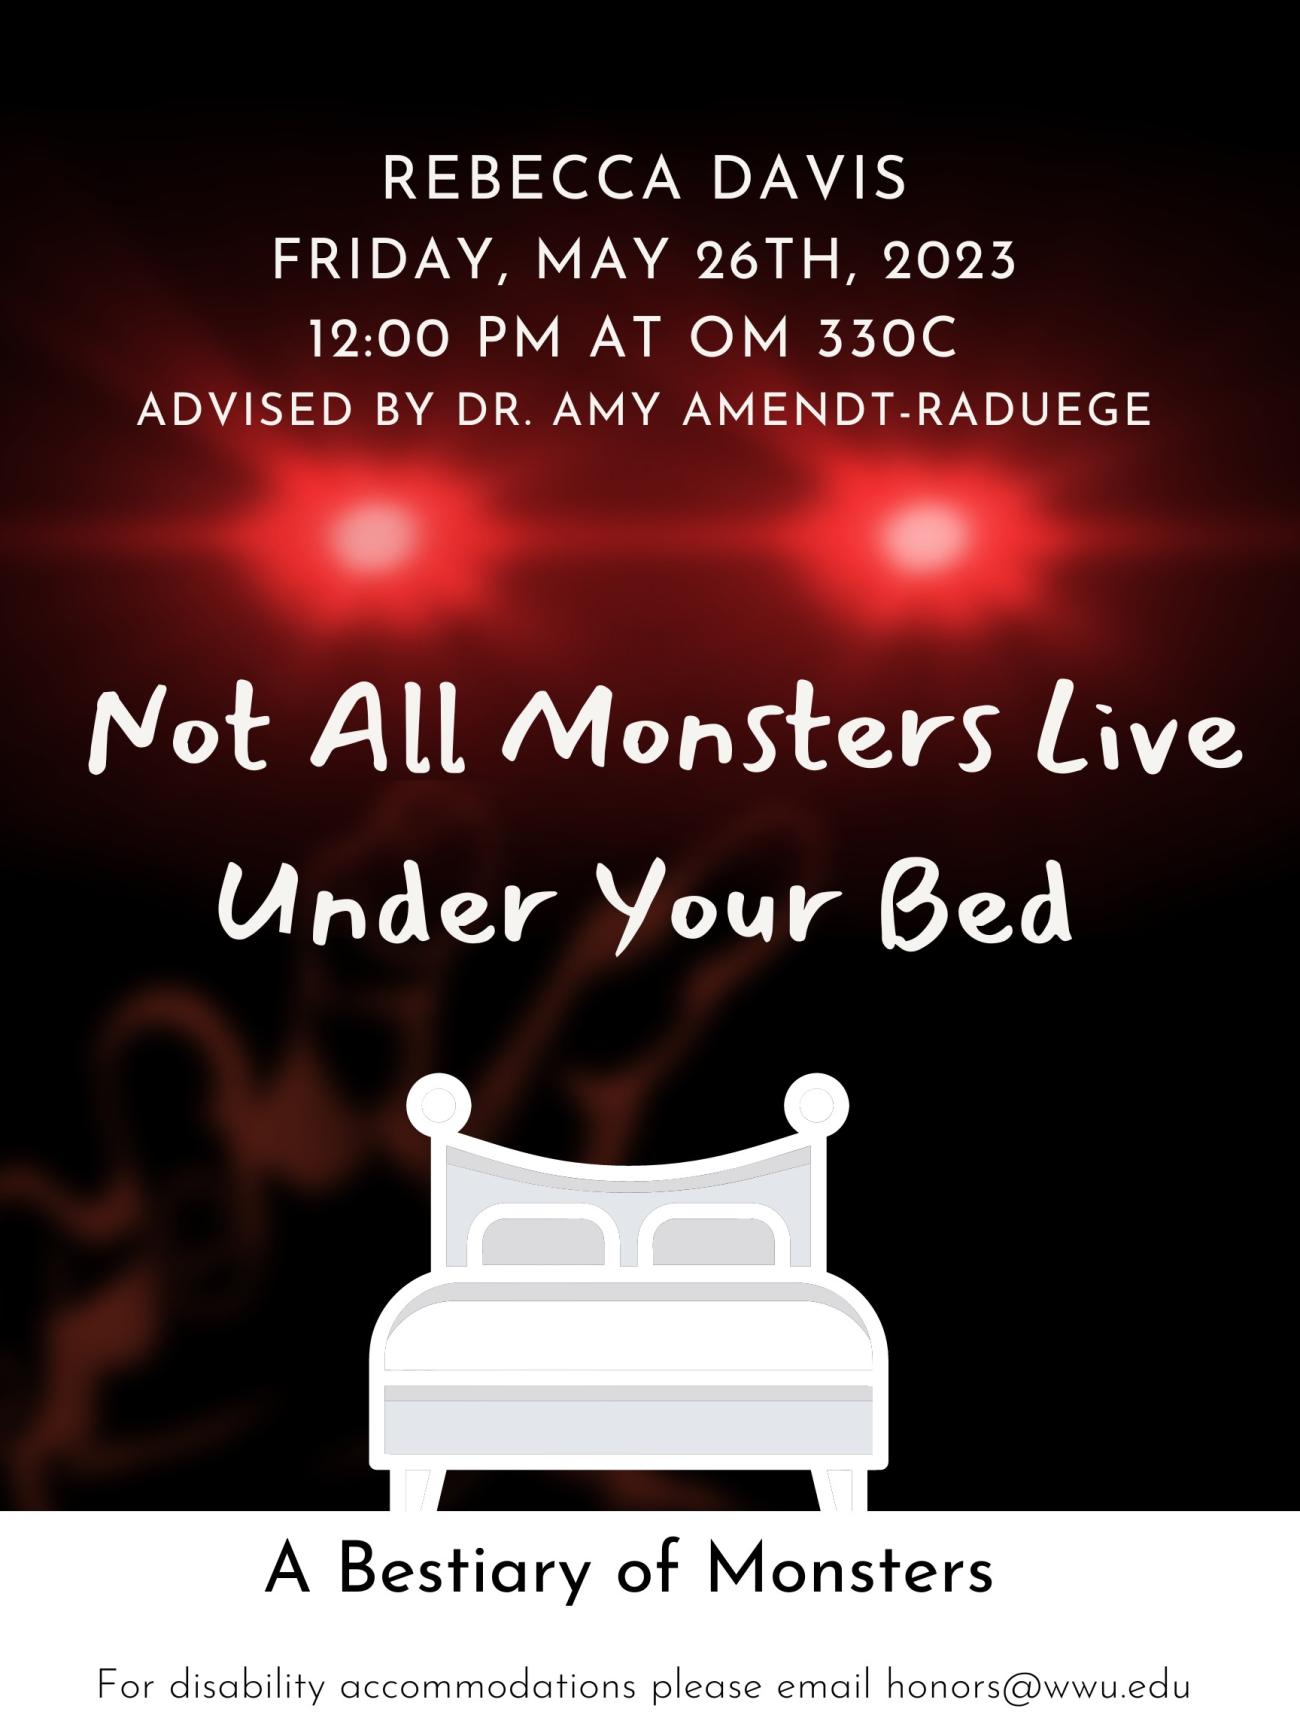 In the black background, red glowing eyes and a blurry red hand reach out to a white bed in front. Text reads “REBECCA DAVIS, FRIDAY, MAY 26TH, 2023, 12:00 PM AT OM 330C, ADVISED BY DR.AMY AMENDT-RADUEGE, Not All Monsters Live under Your Bed, A Bestiary of Monsters, For disability accommodations please email honors@wwu.edu”